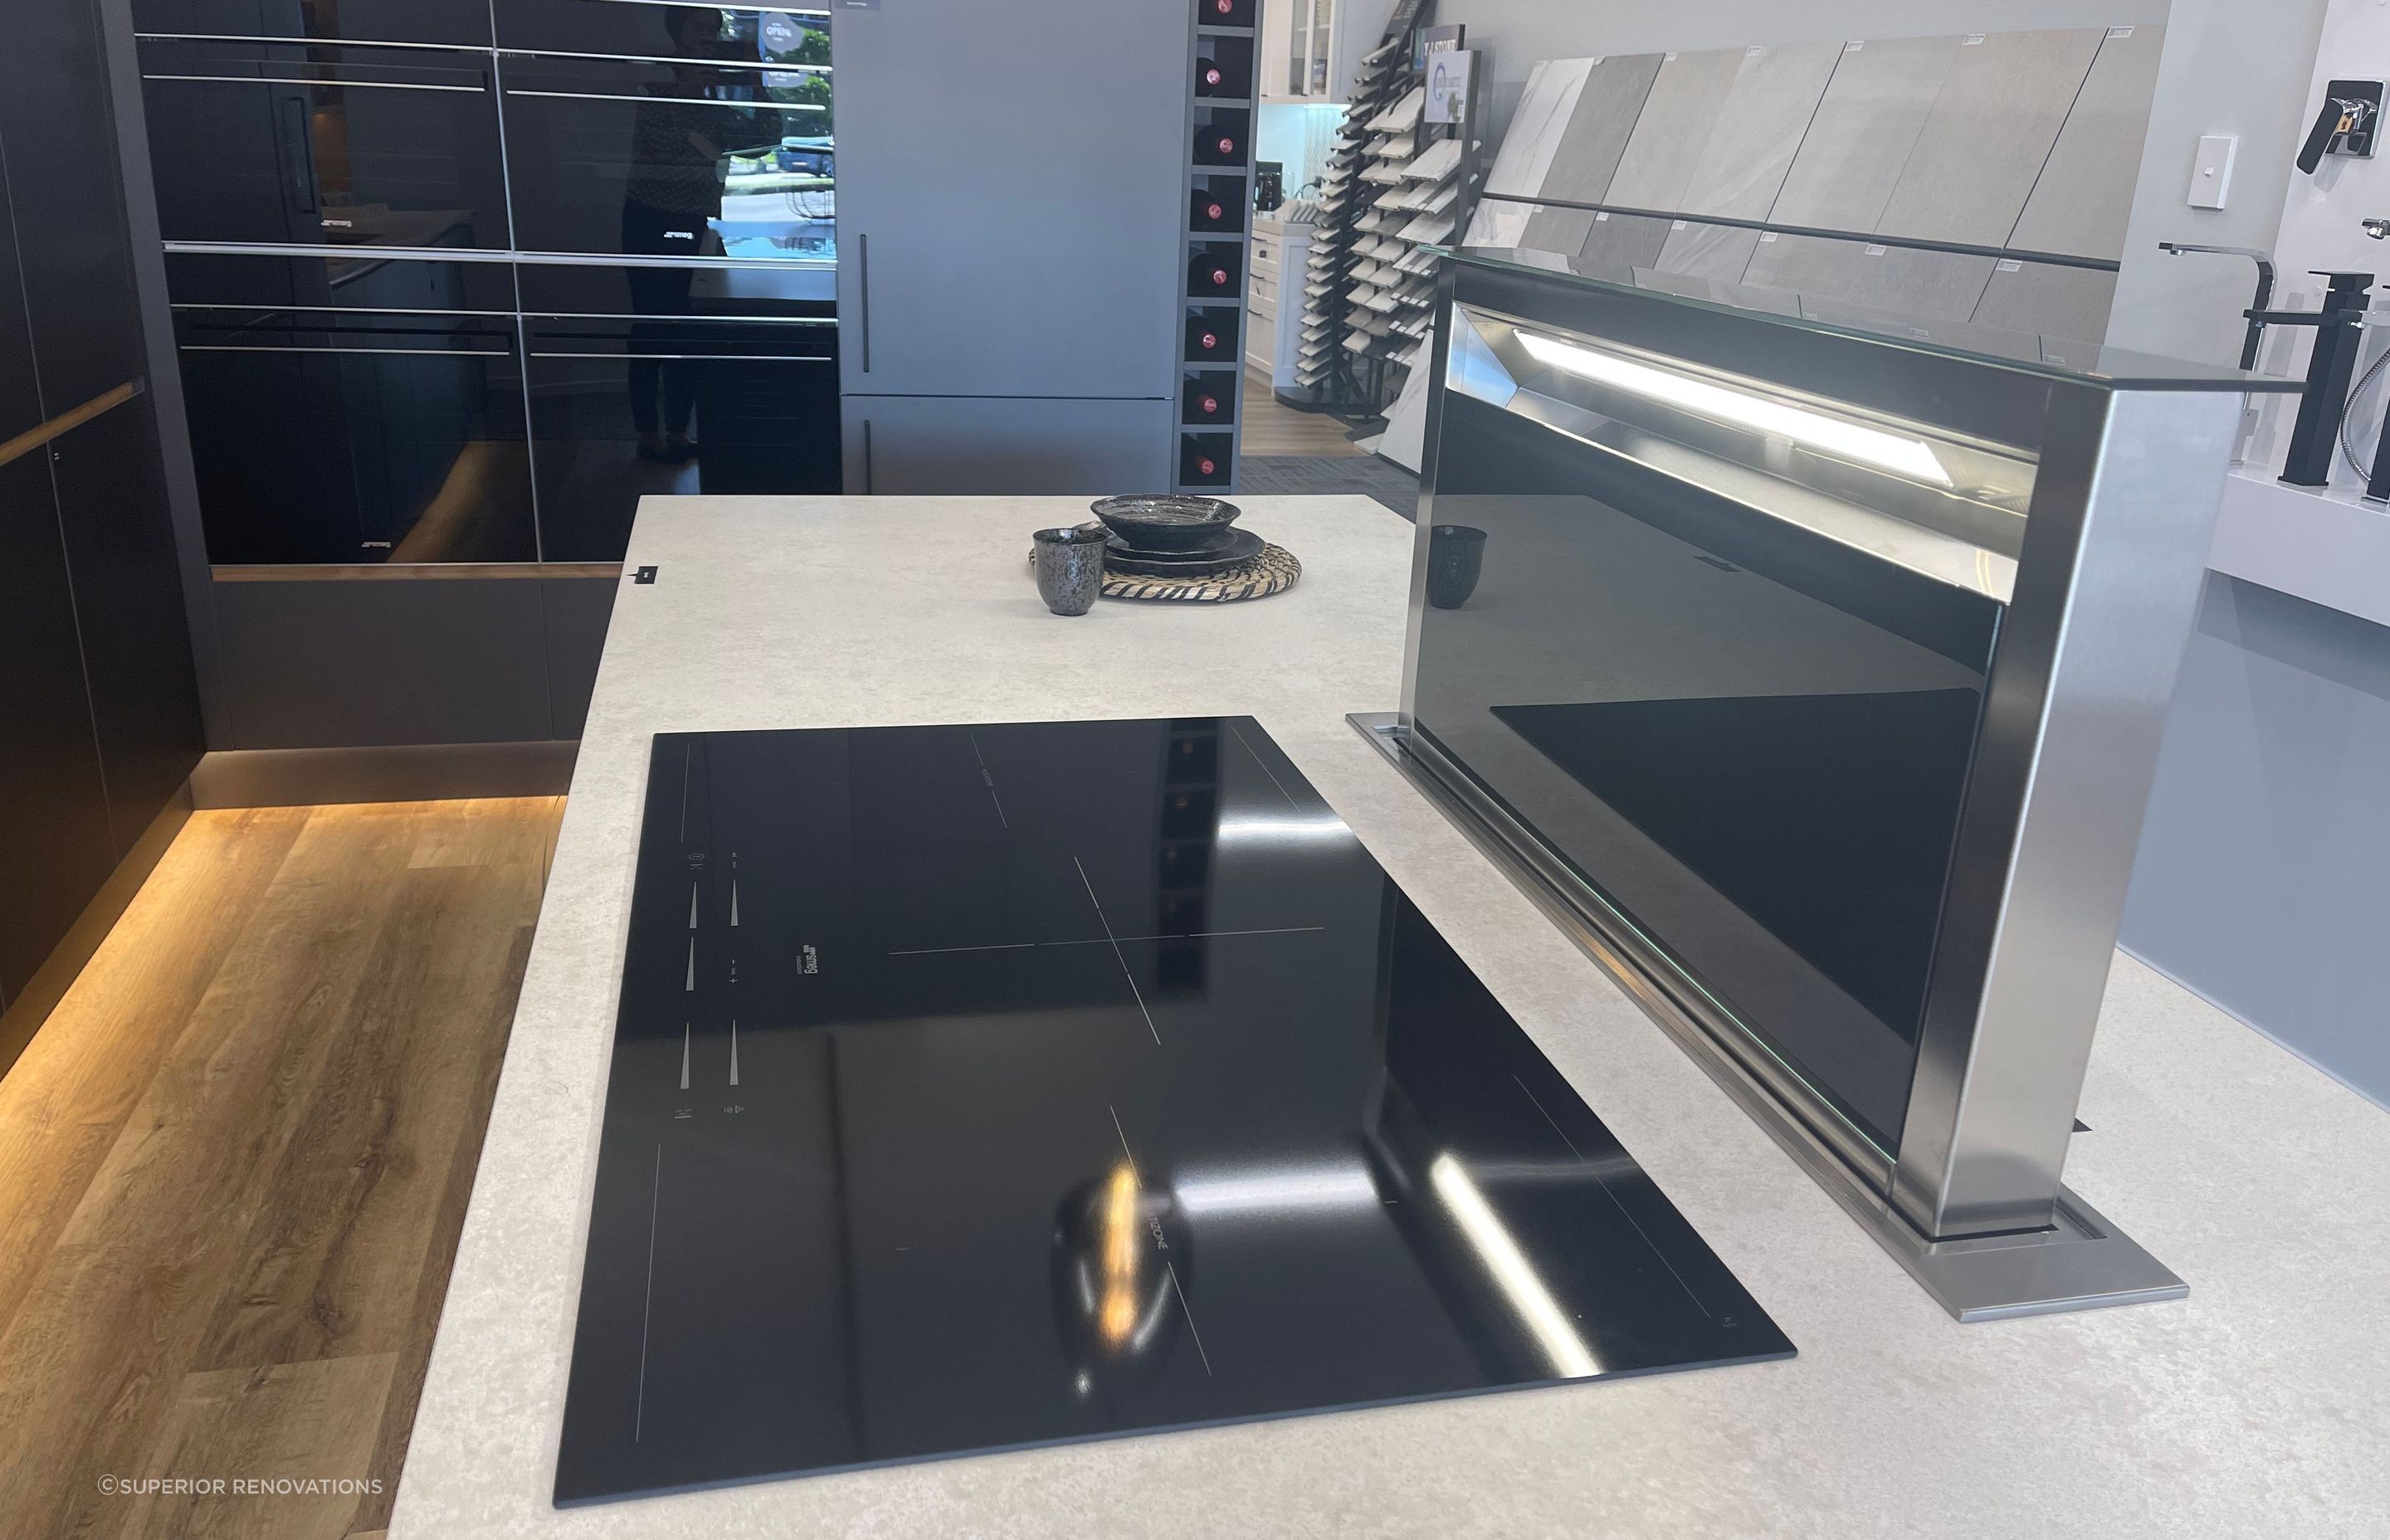 When in use the downdraft range hood comes up from the benchtop. This can be seen in our kitchen showroom in Auckland (Wairau Valley).